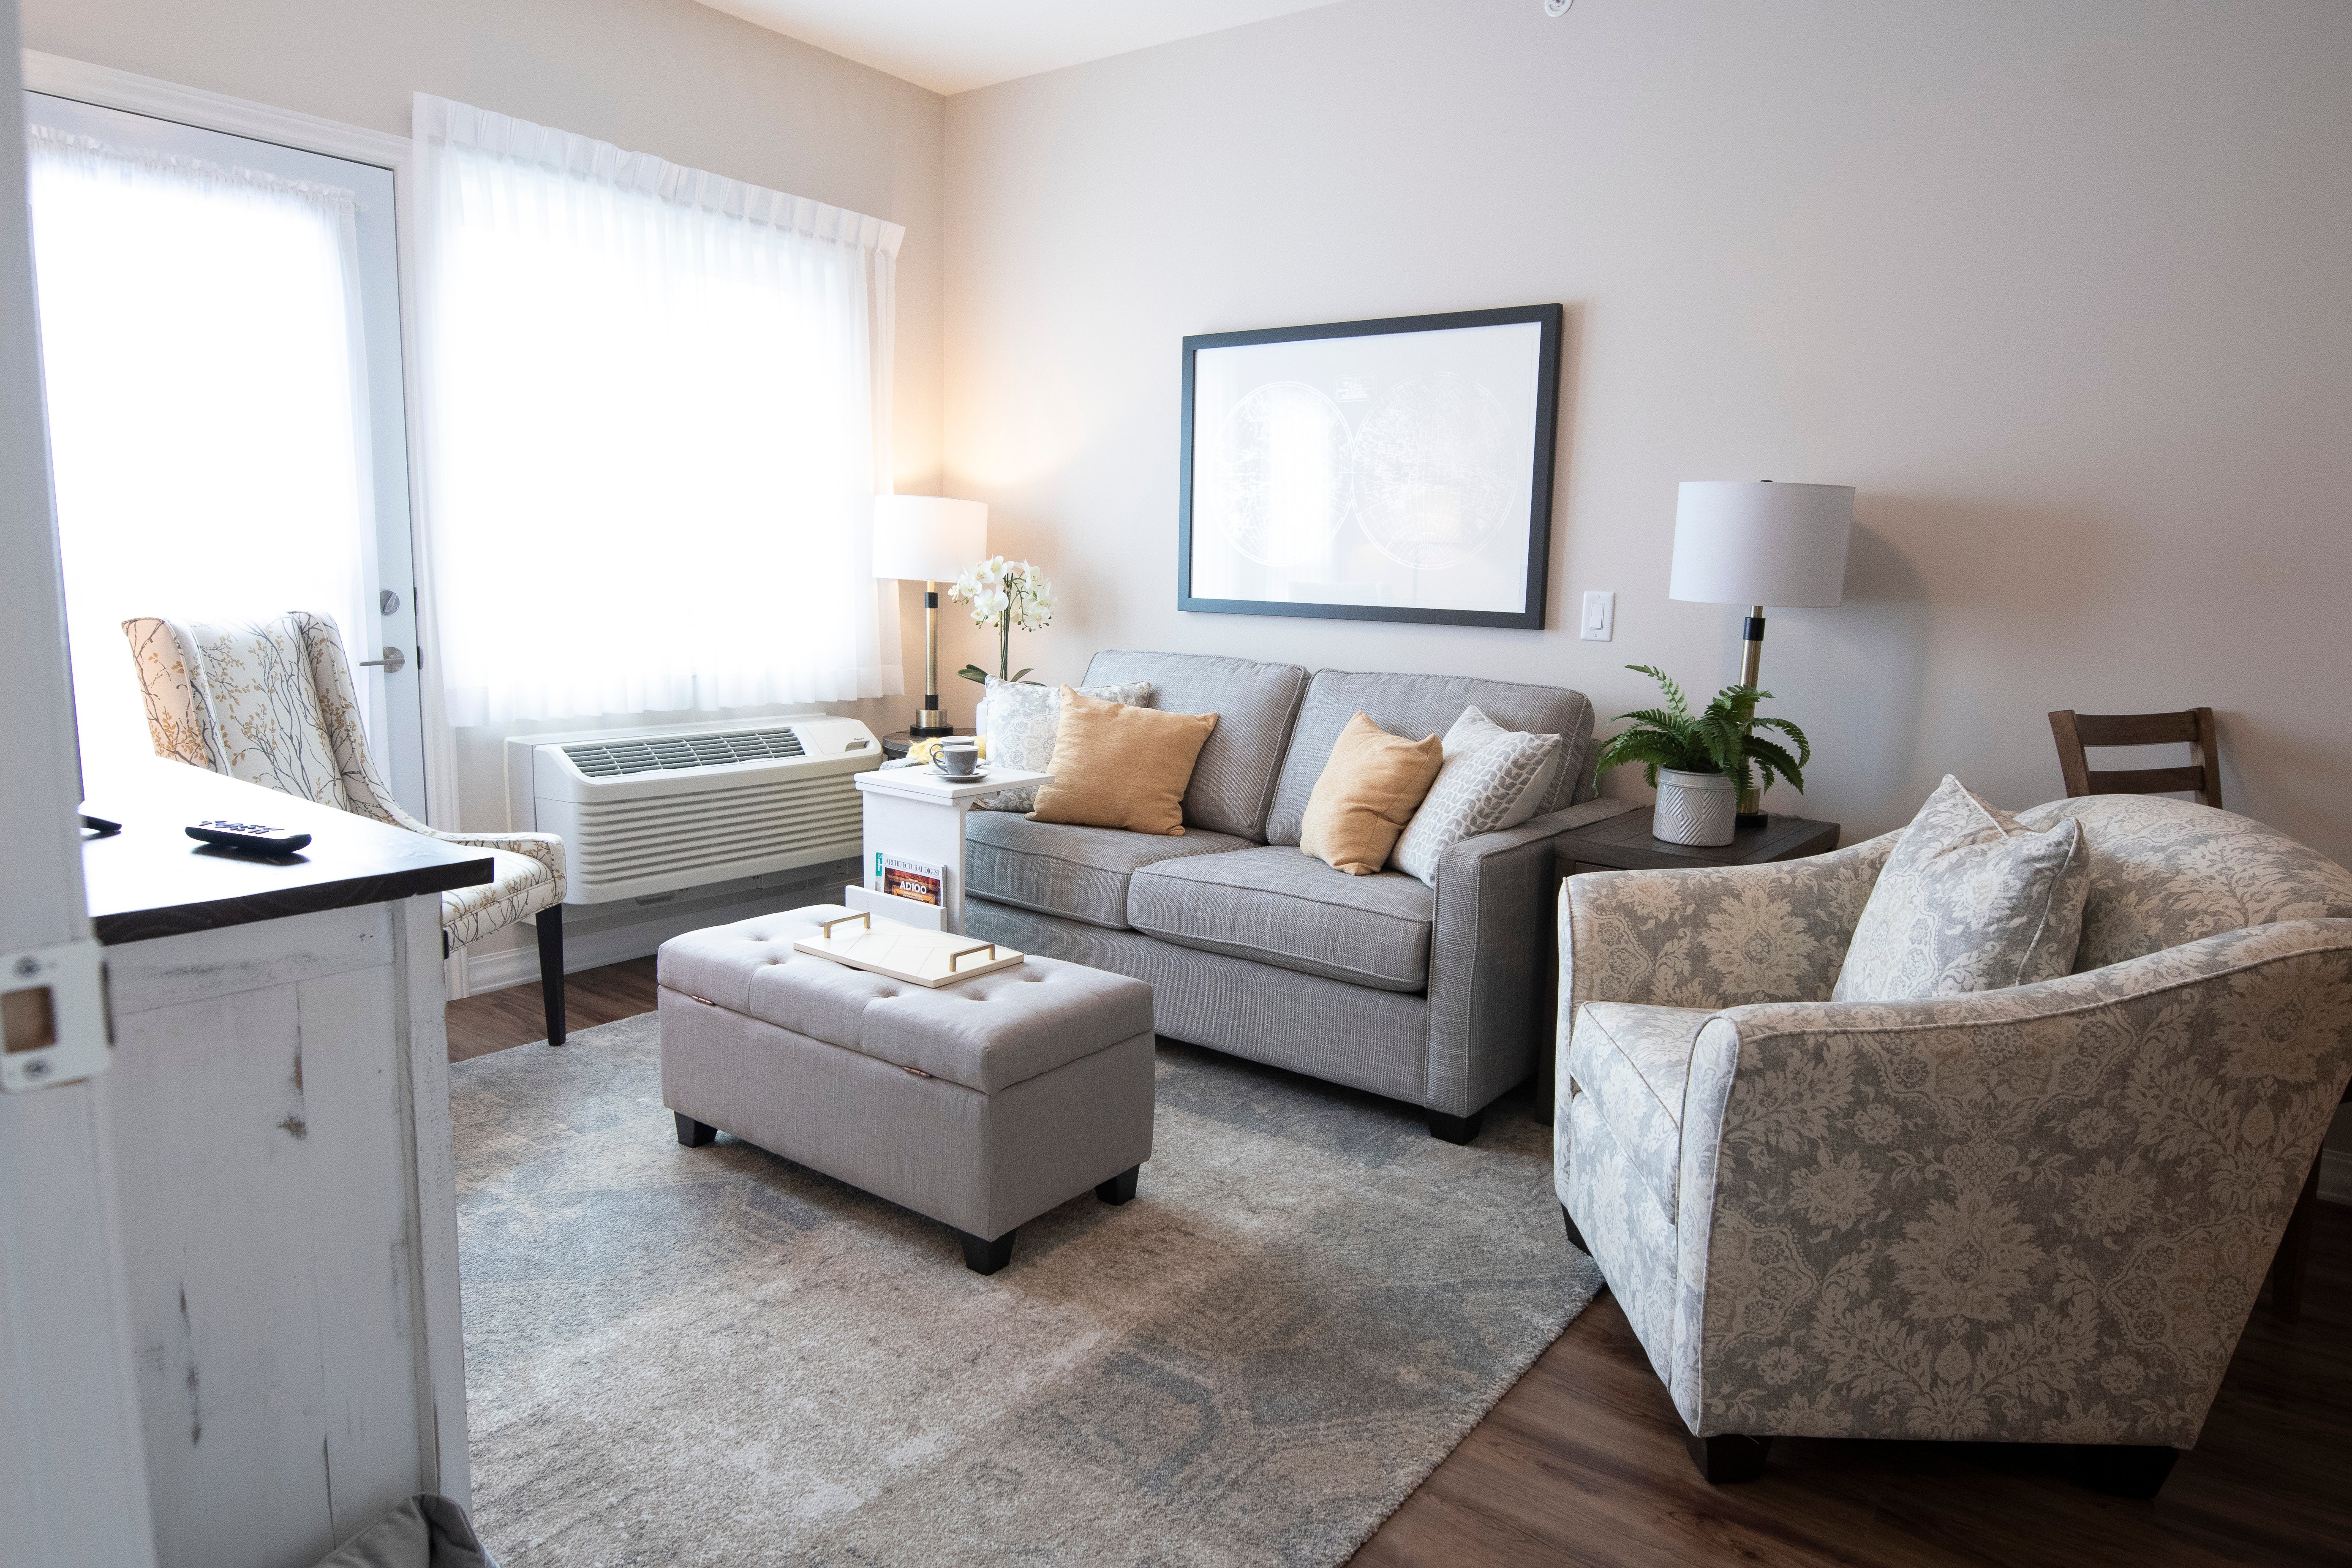 Image of a suite at Island Park Retirement Residence in Campbellford